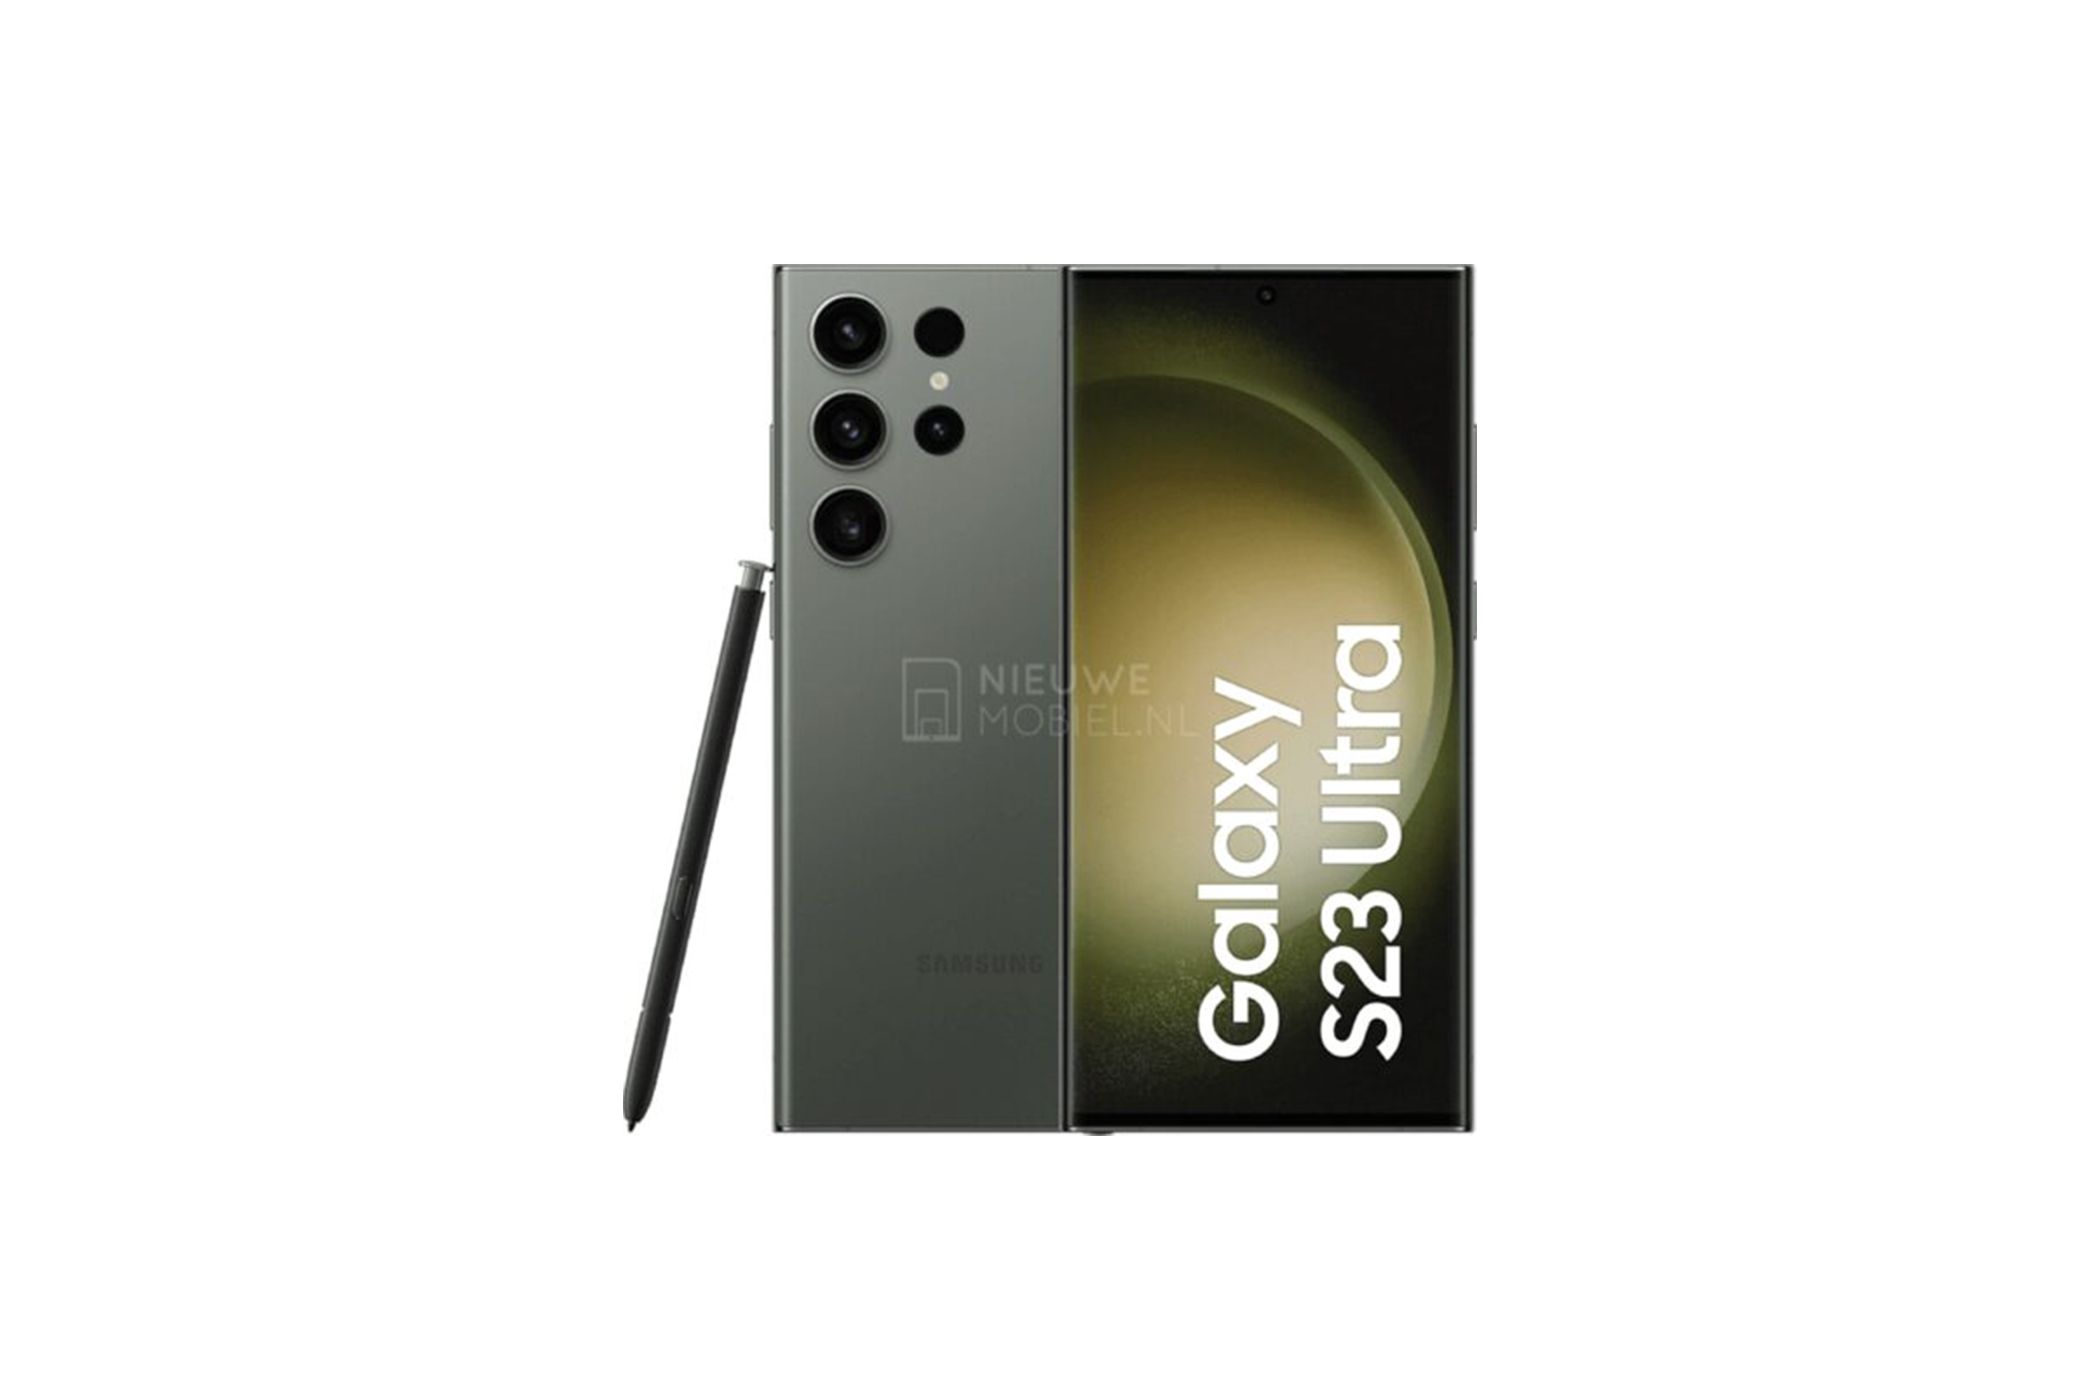 Leaked render of the Botanic Green Galaxy S23 Ultra with S Pen.